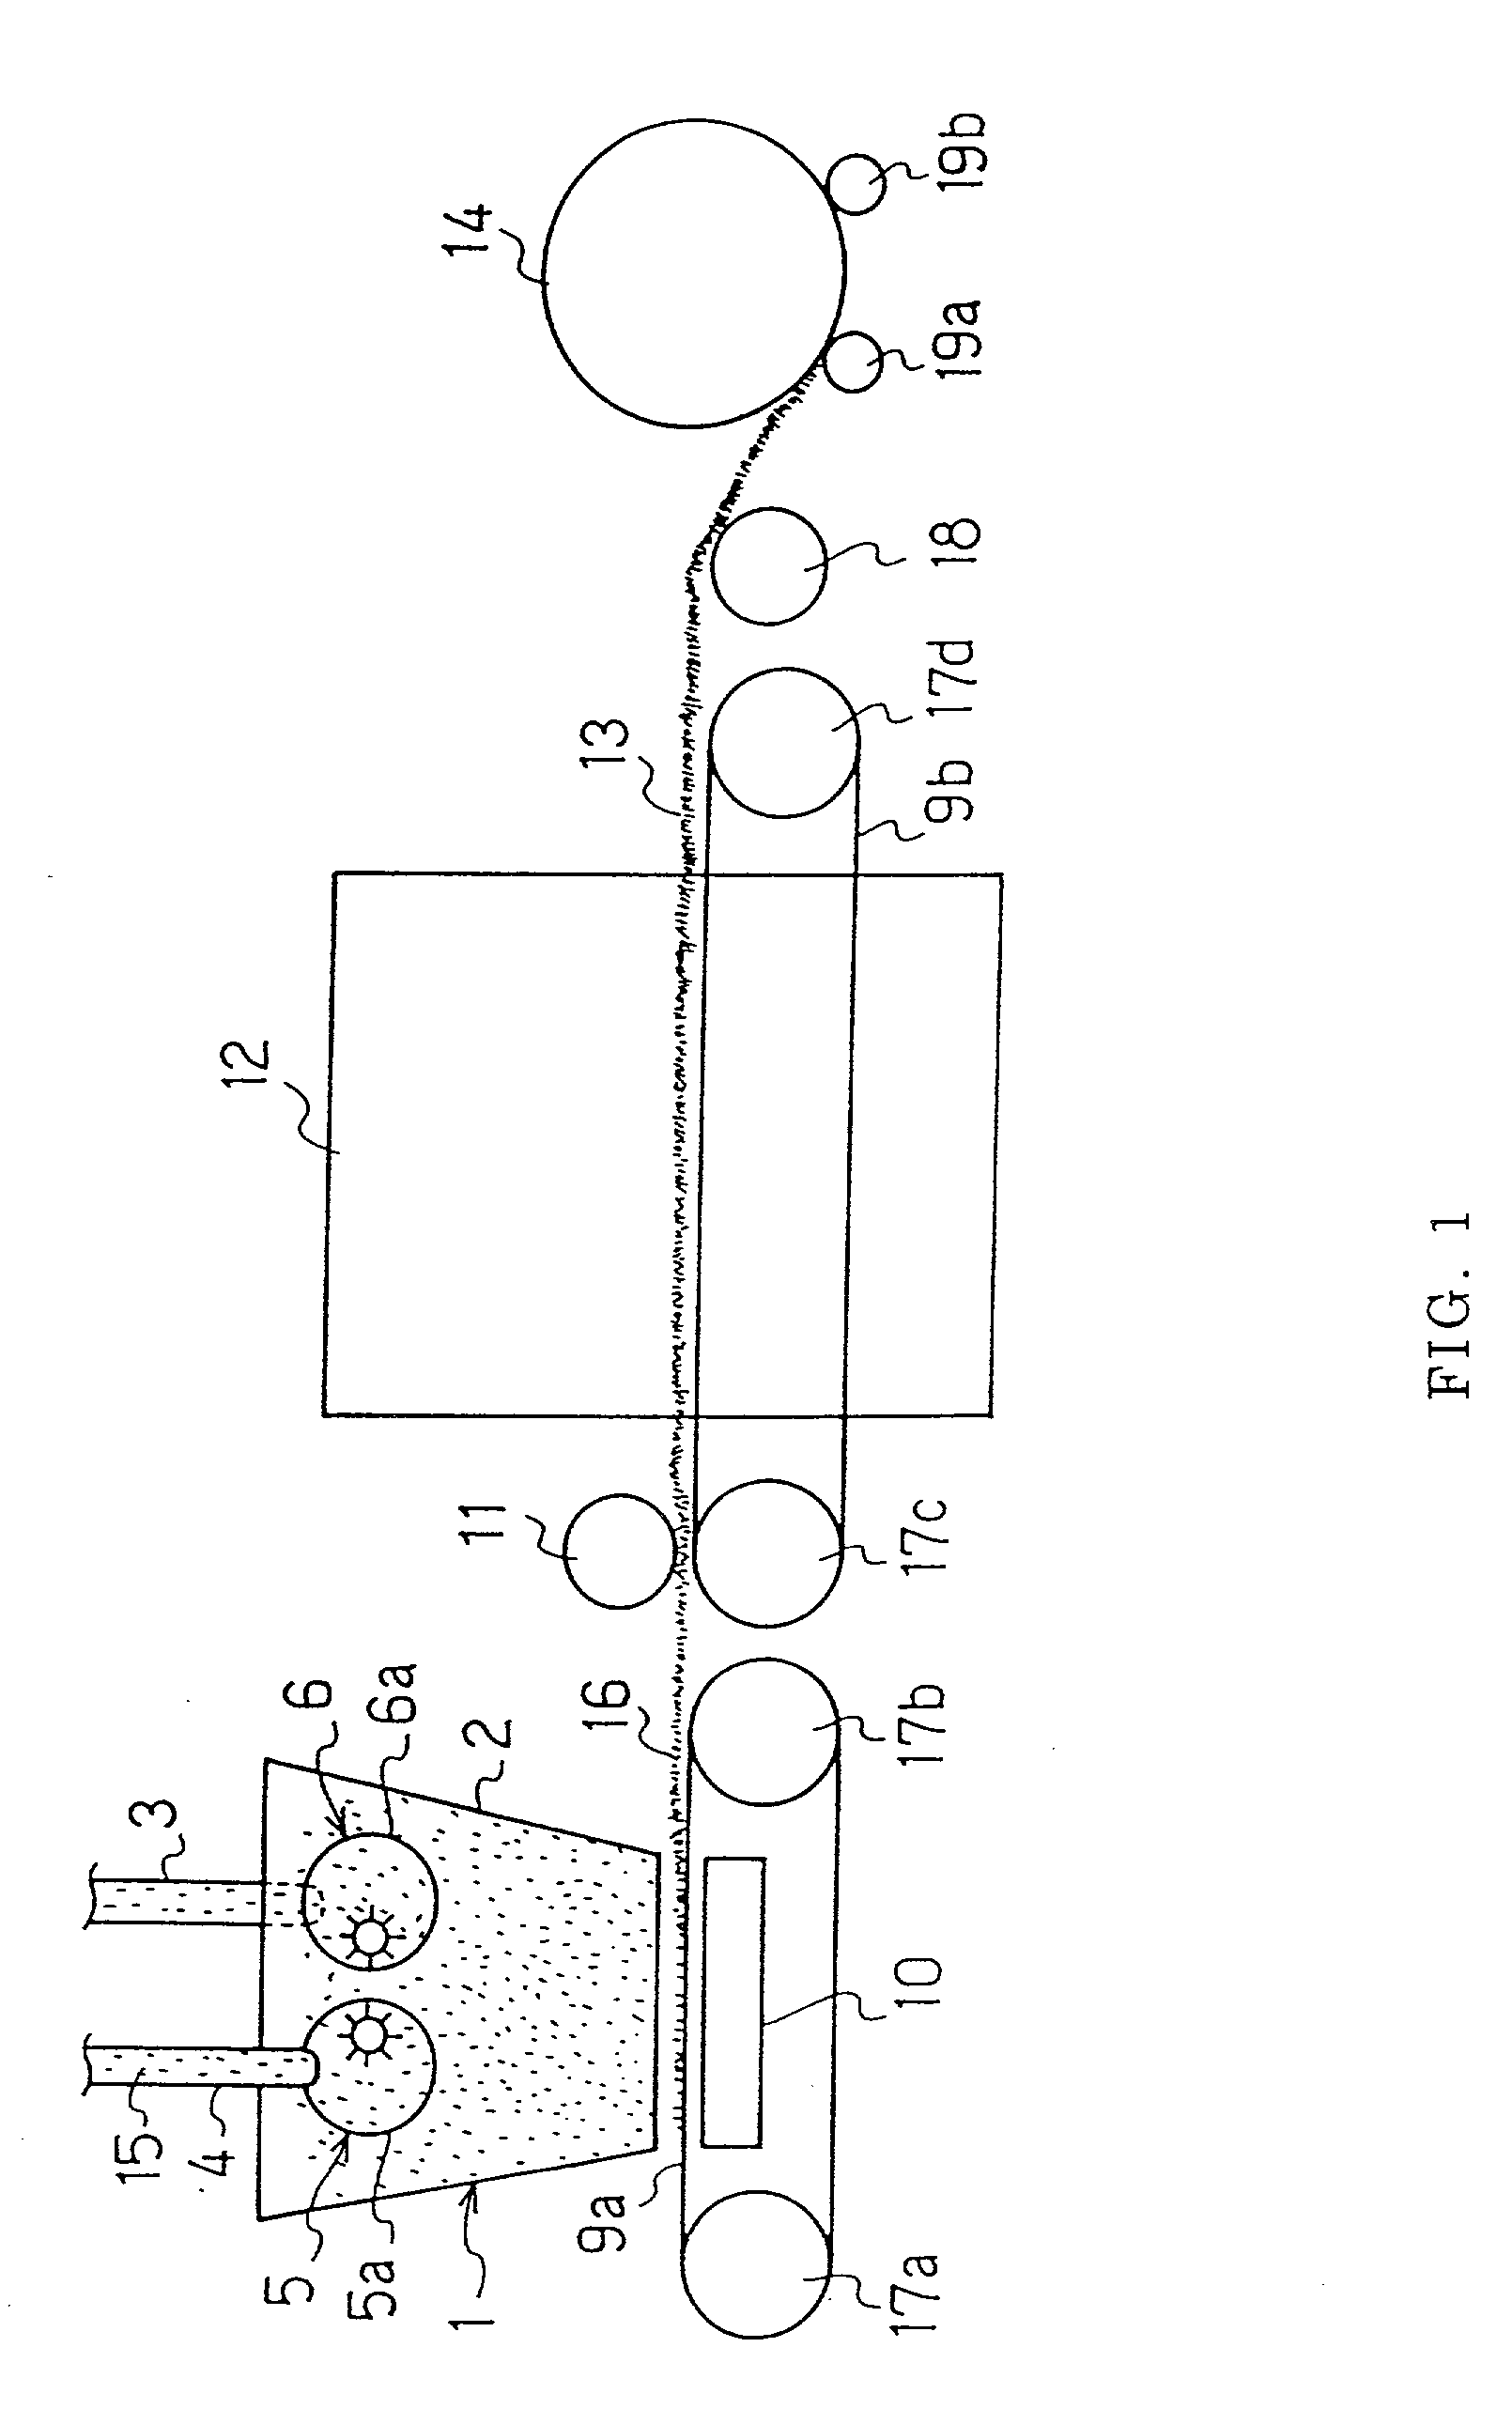 Non-woven fabric comprising staple fibers and an absorbent article using the same